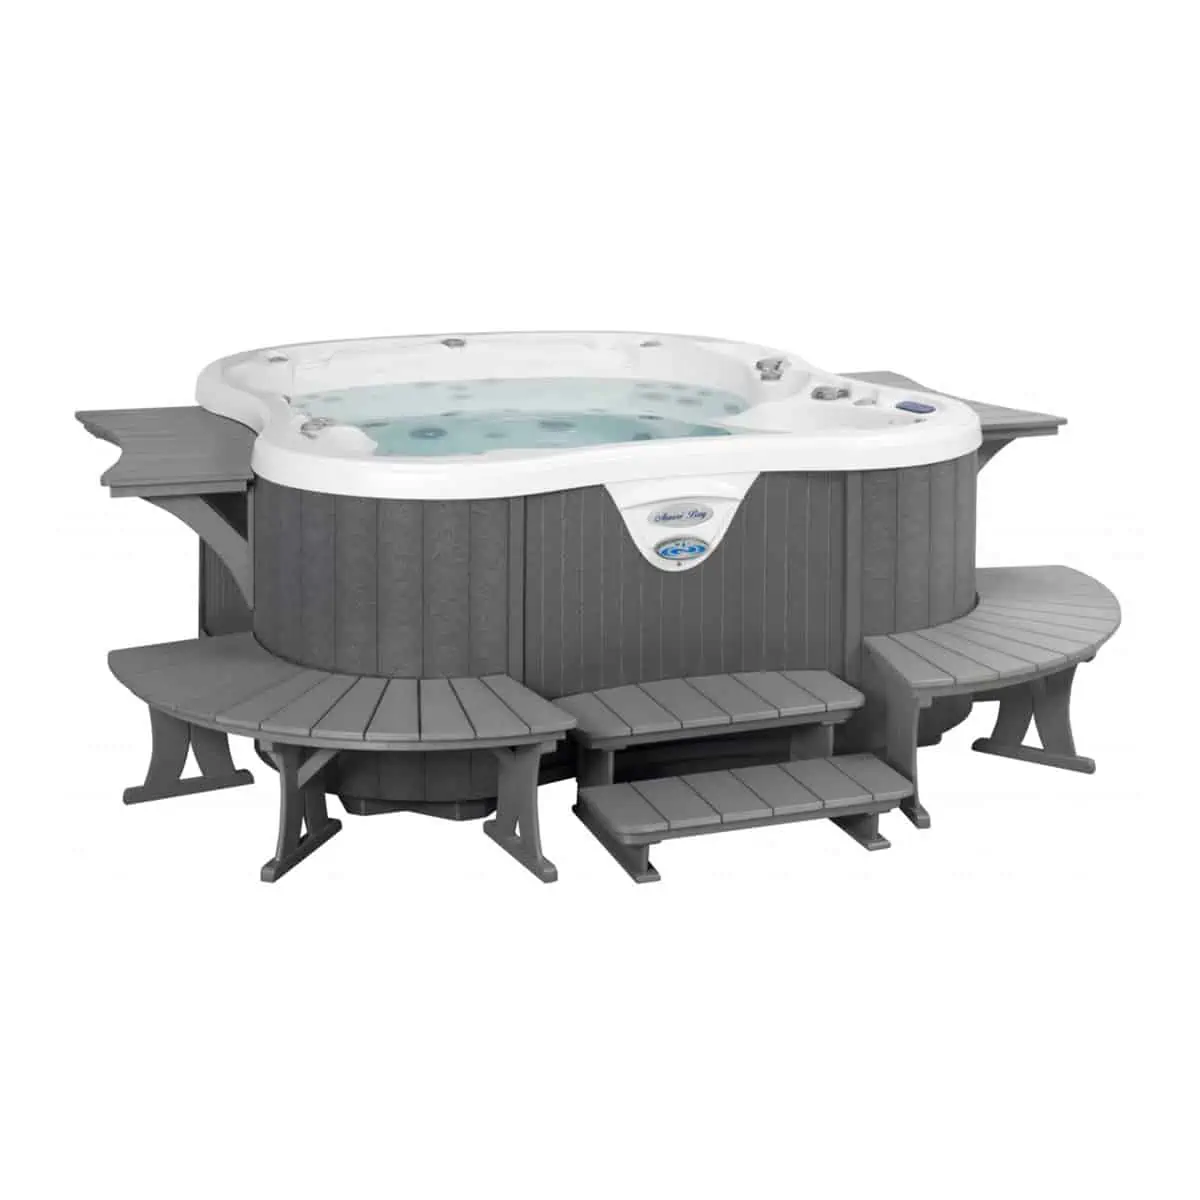 The Best Hot Tub Ever Raleigh NC